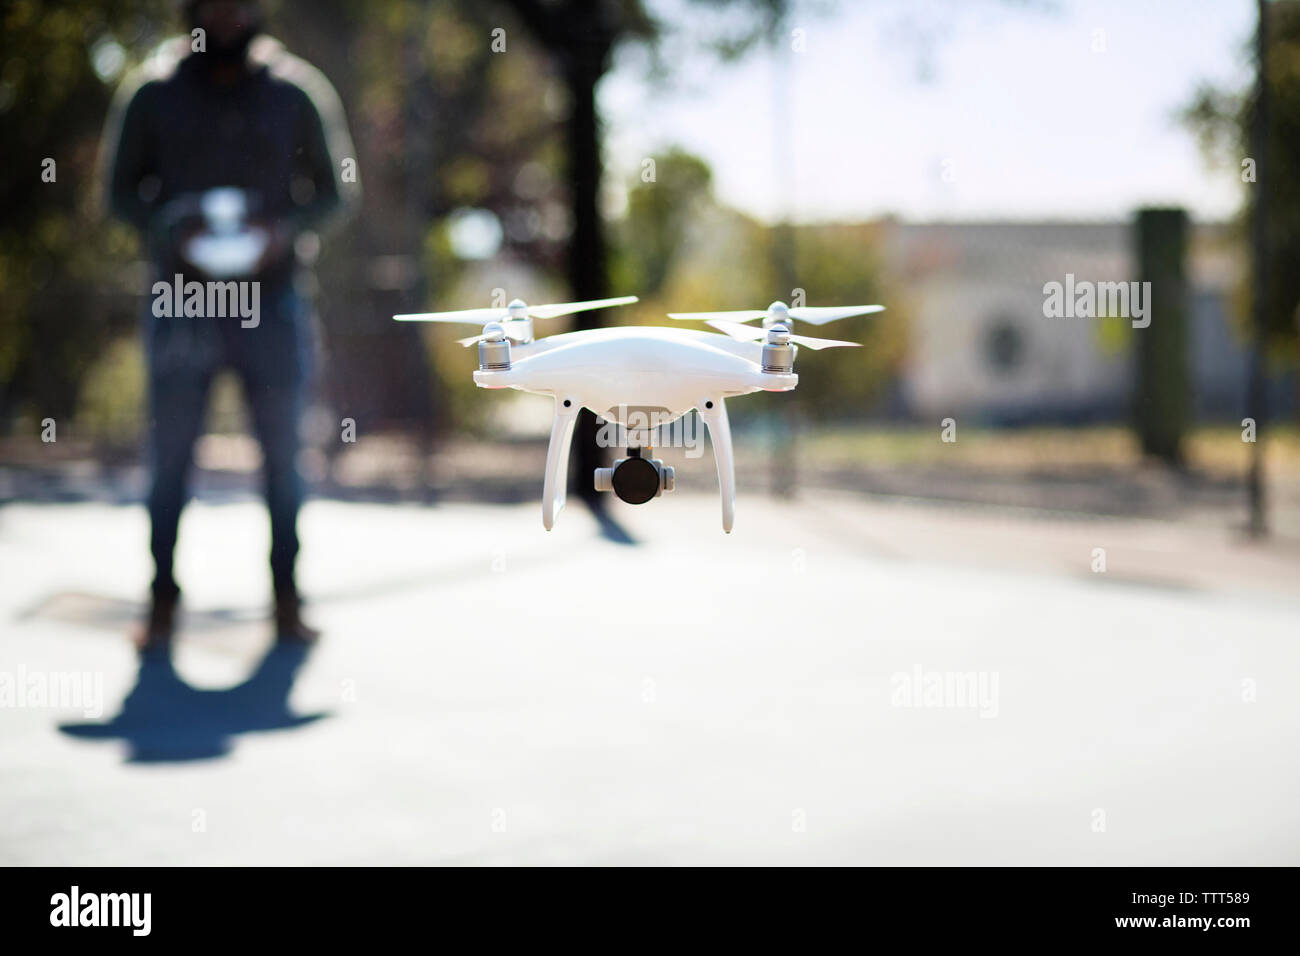 Close-up of drone operated by man in basketball court Stock Photo